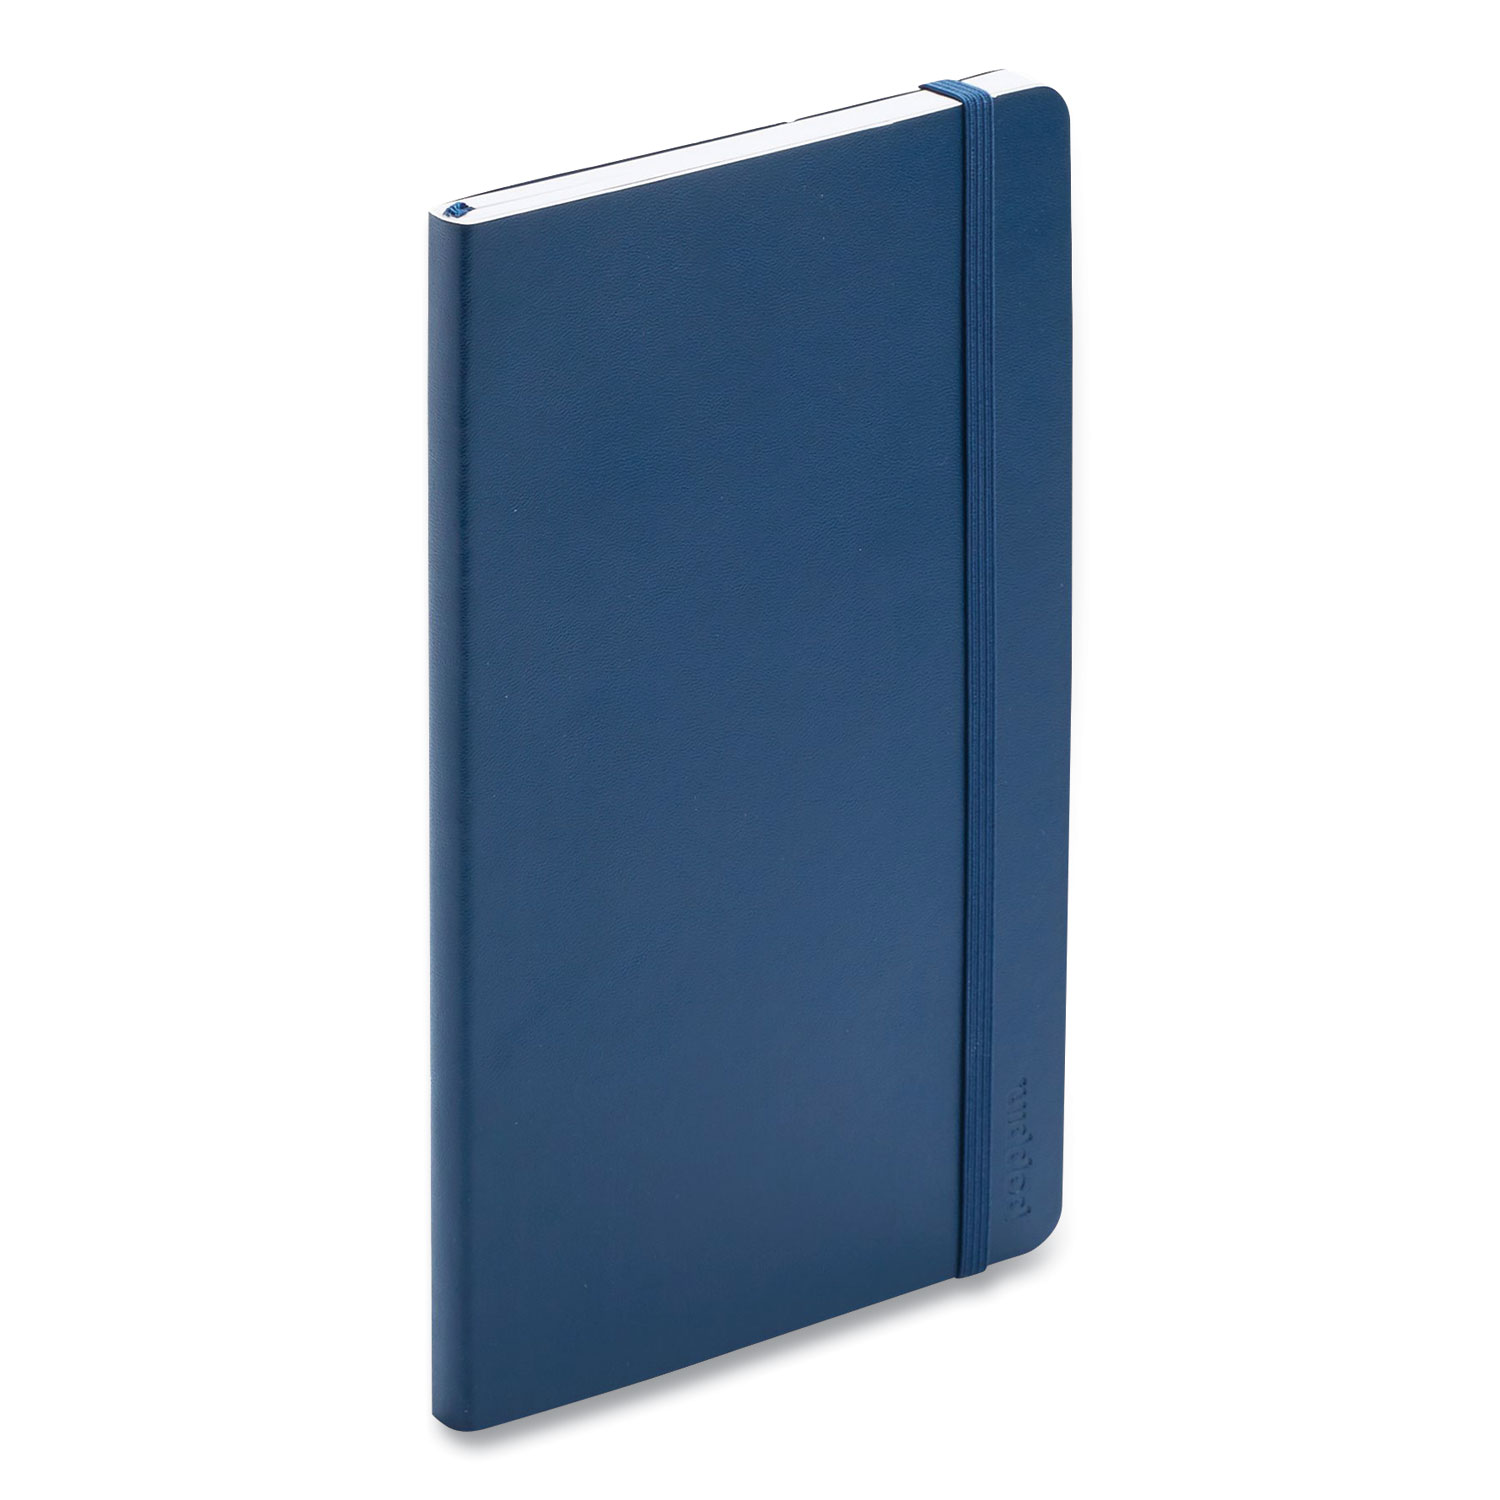  Poppin 100358 Professional Notebook, College Rule, Navy 8.25 x 5, 96 Sheets (PPJ1438128) 